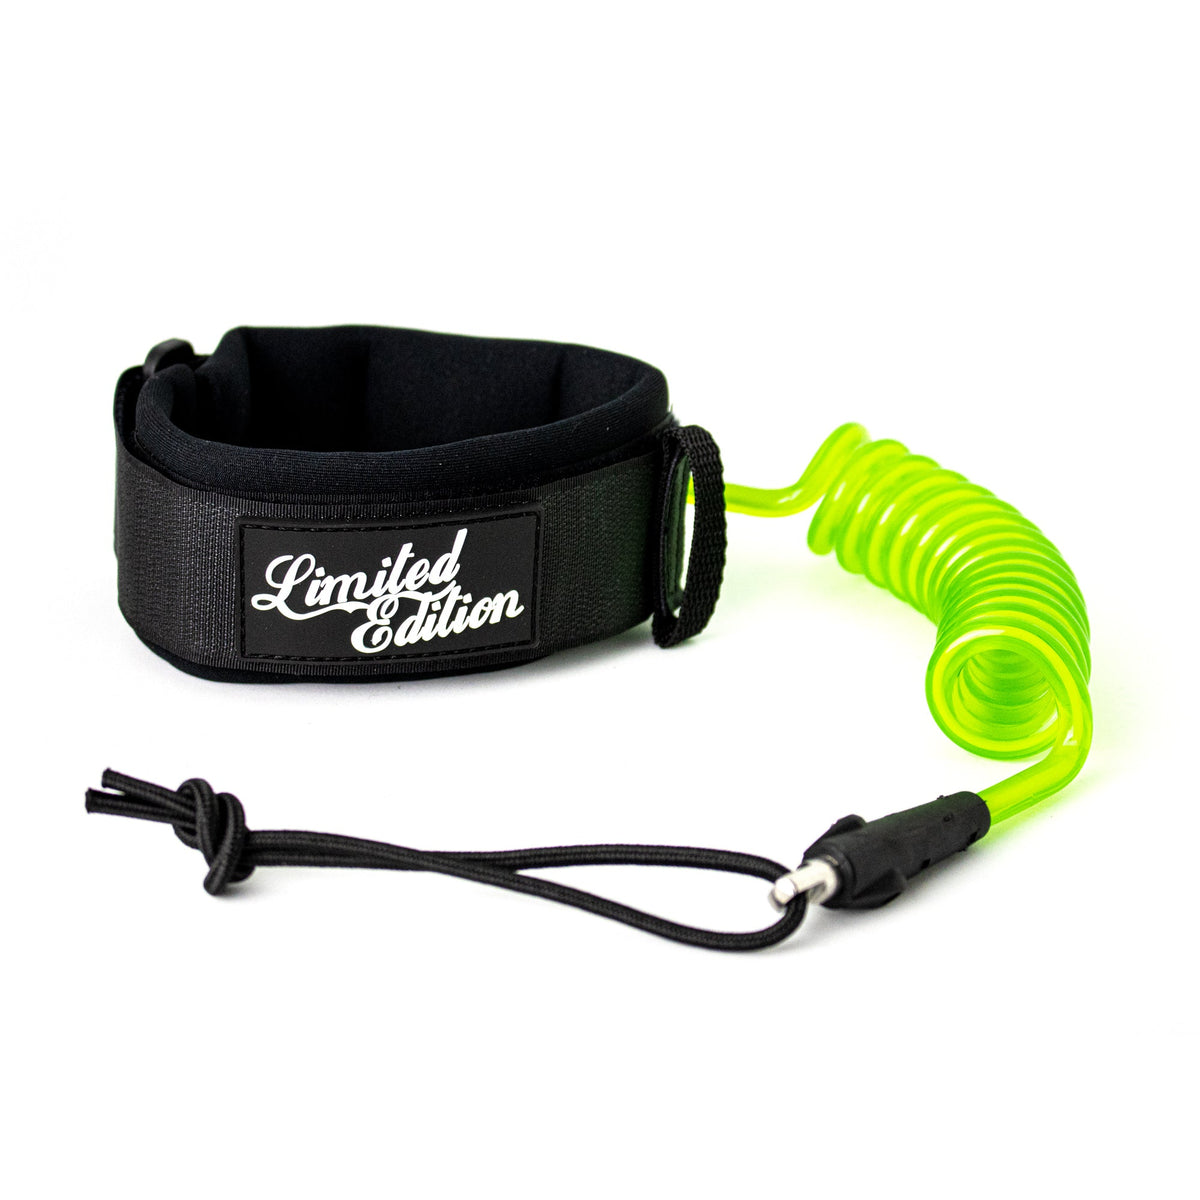 LE Pro Bicep Leash - Extra Large - 370mm Cuff